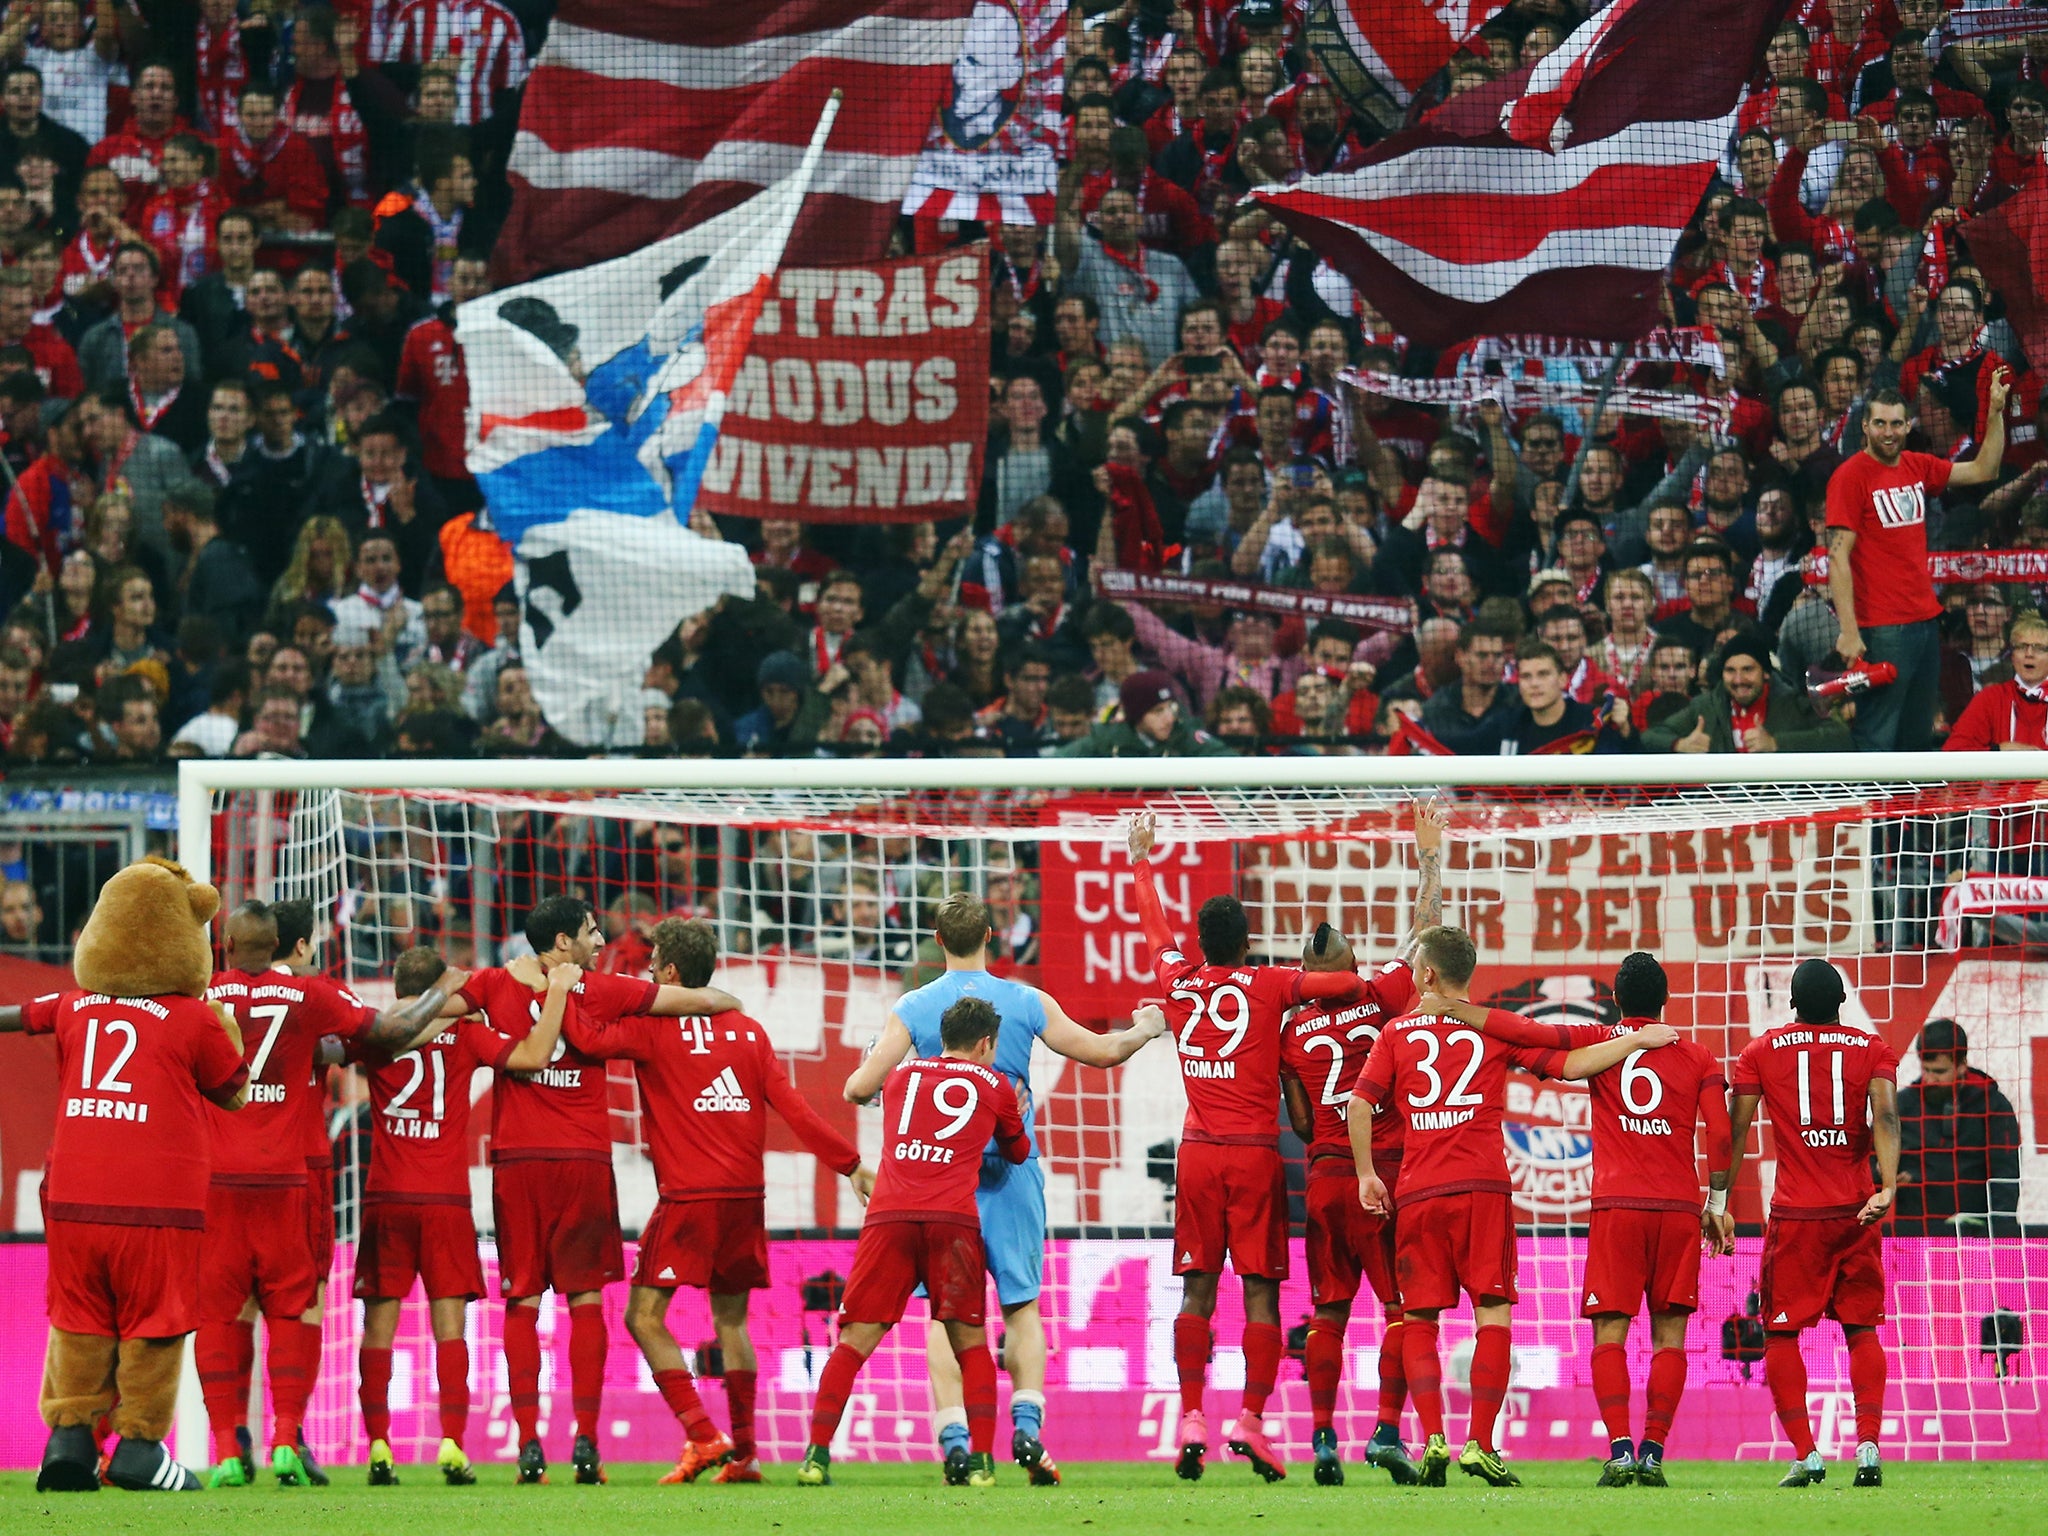 &#13;
Bayern Munich's Allianz Arena has sold out 100 per cent of games this season&#13;